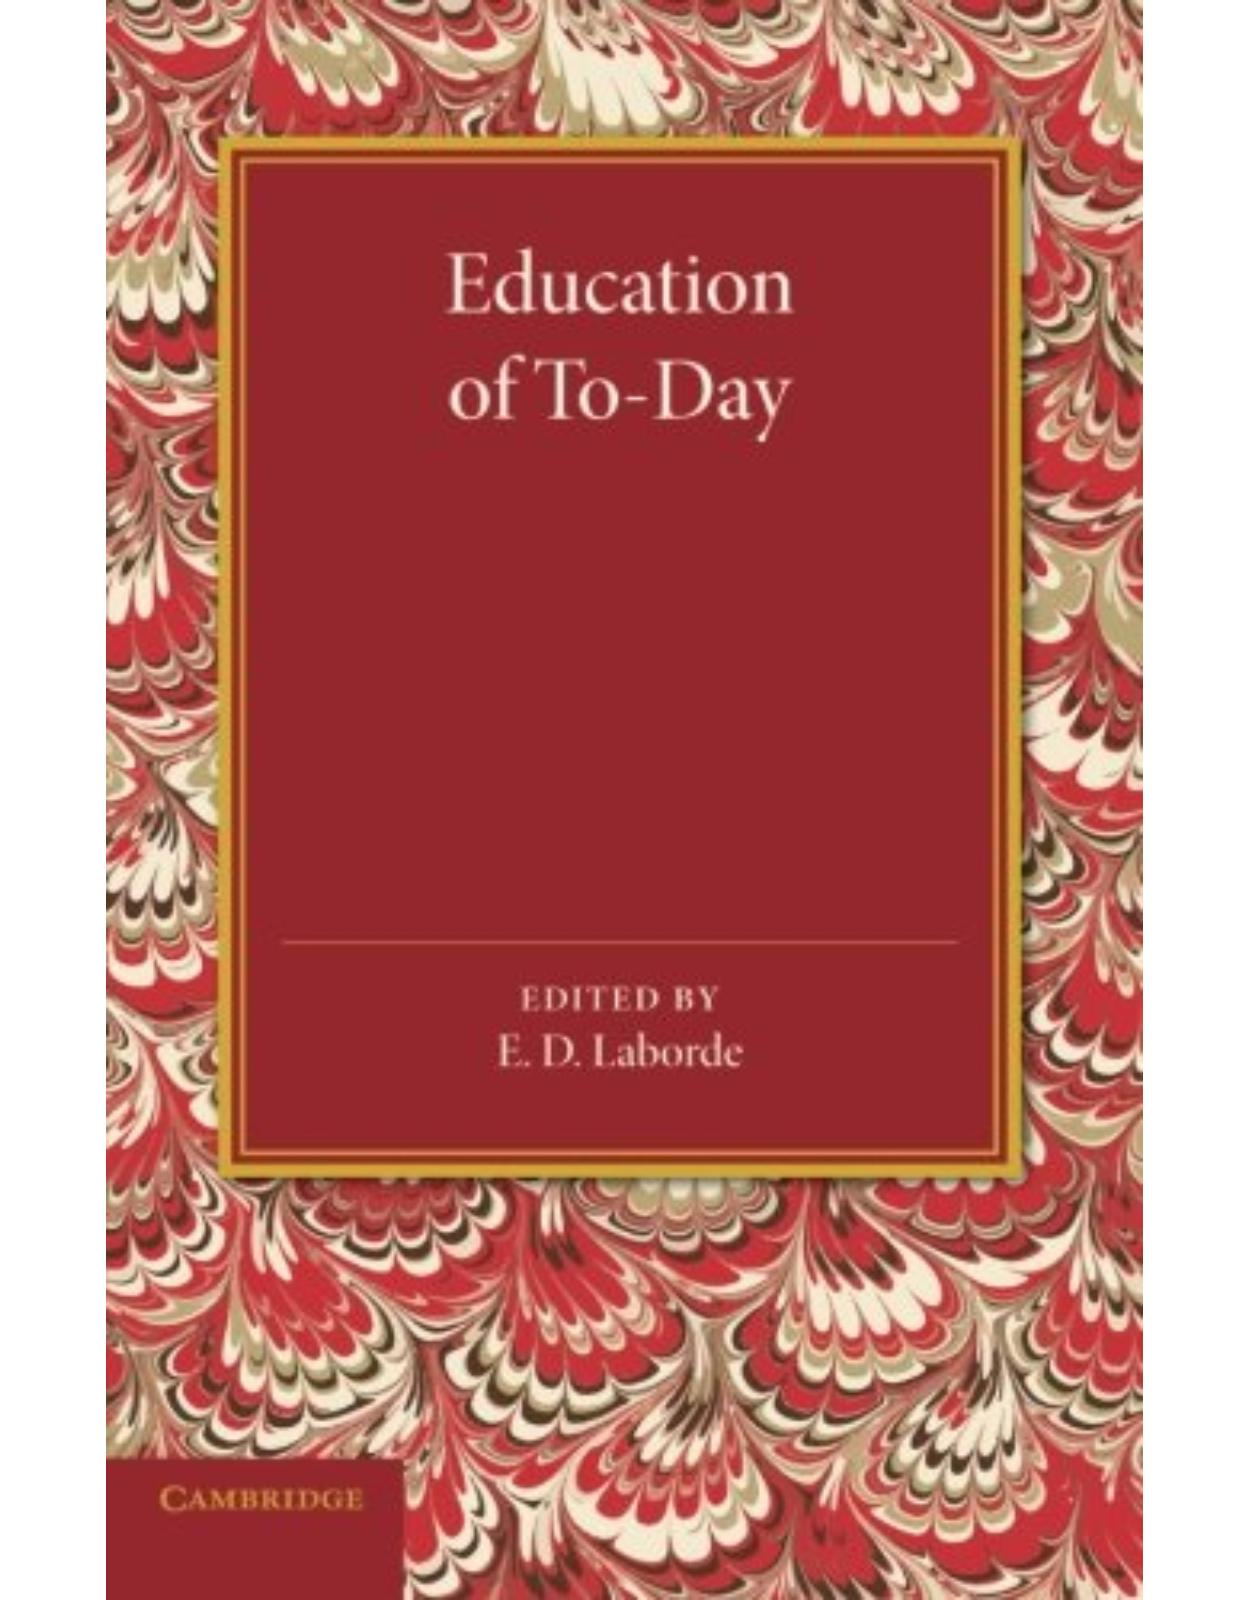 Education of To-Day